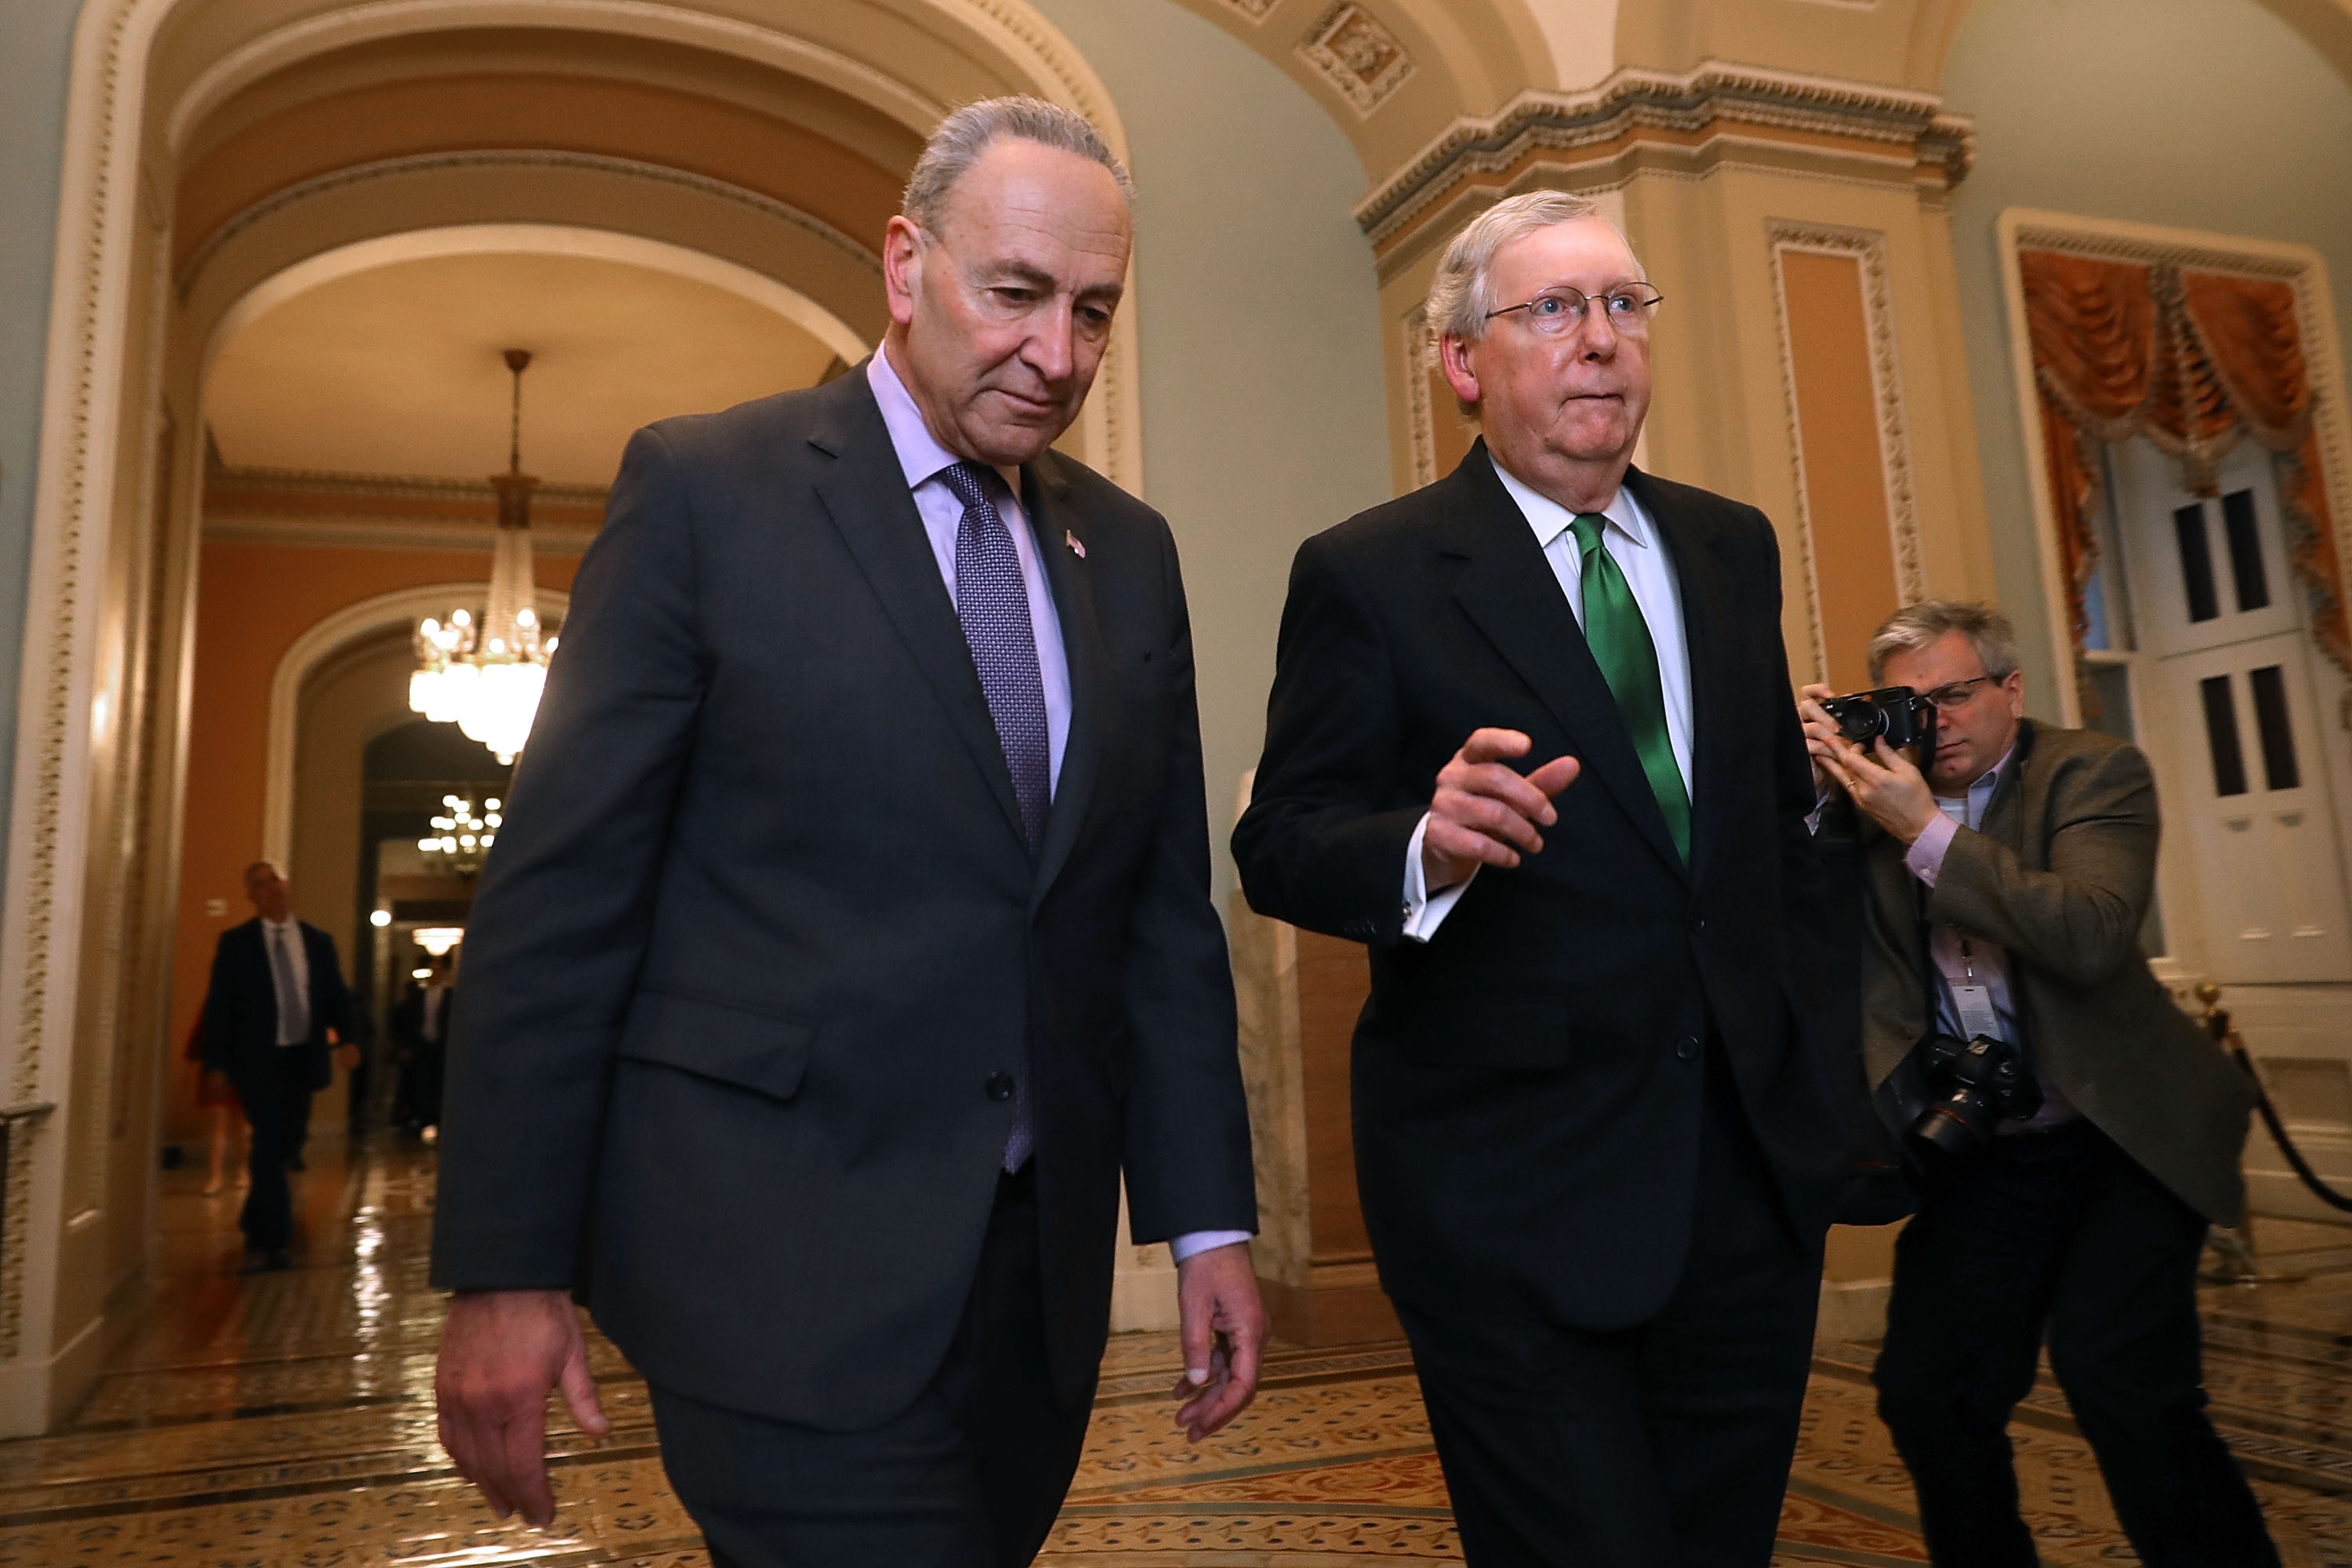 Chuck Schumer and Mitch McConnell walk side-by-side